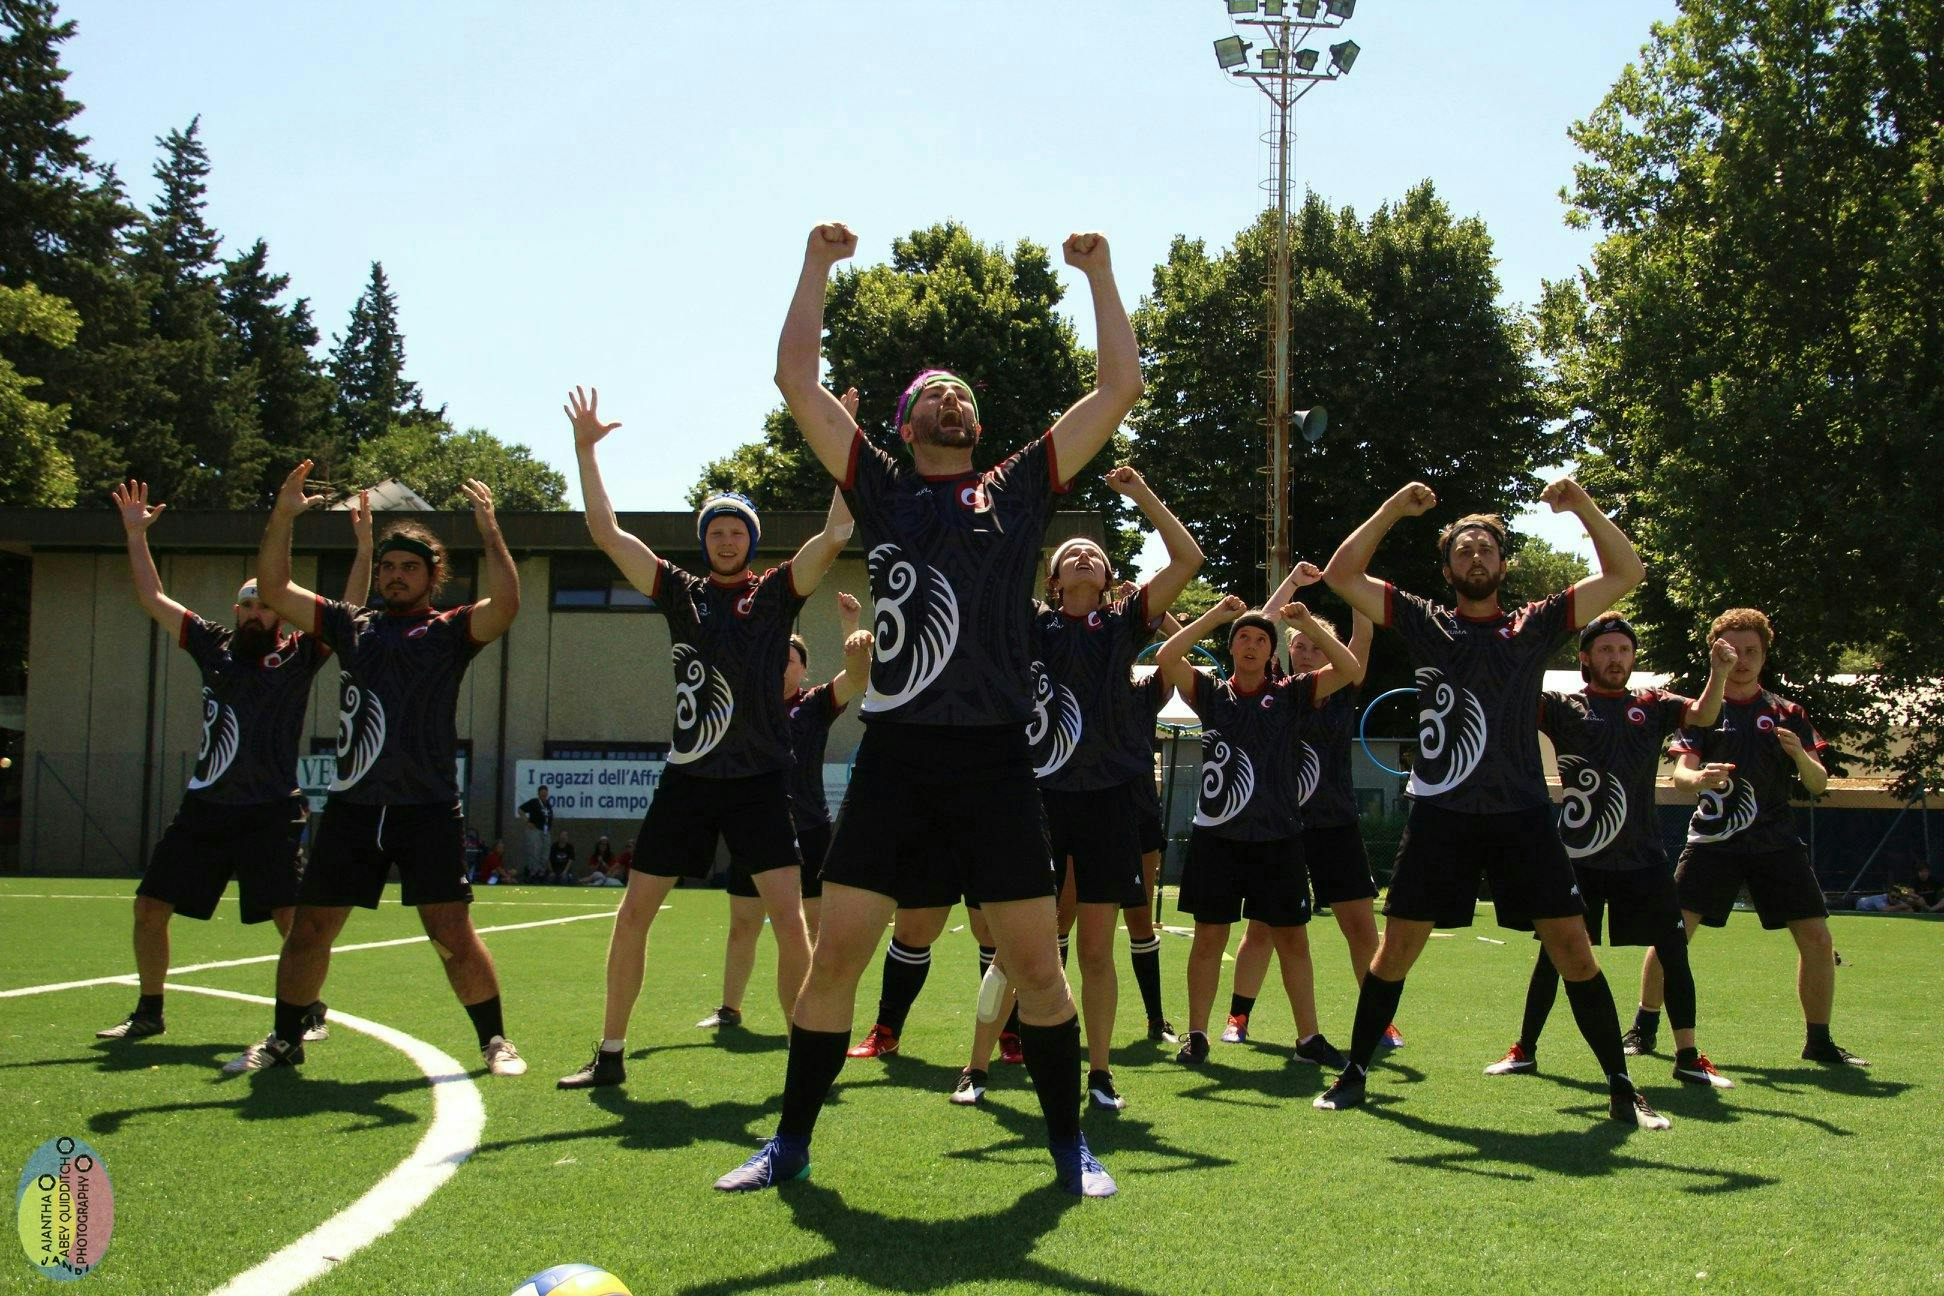 The Black Brooms perform their haka before a game